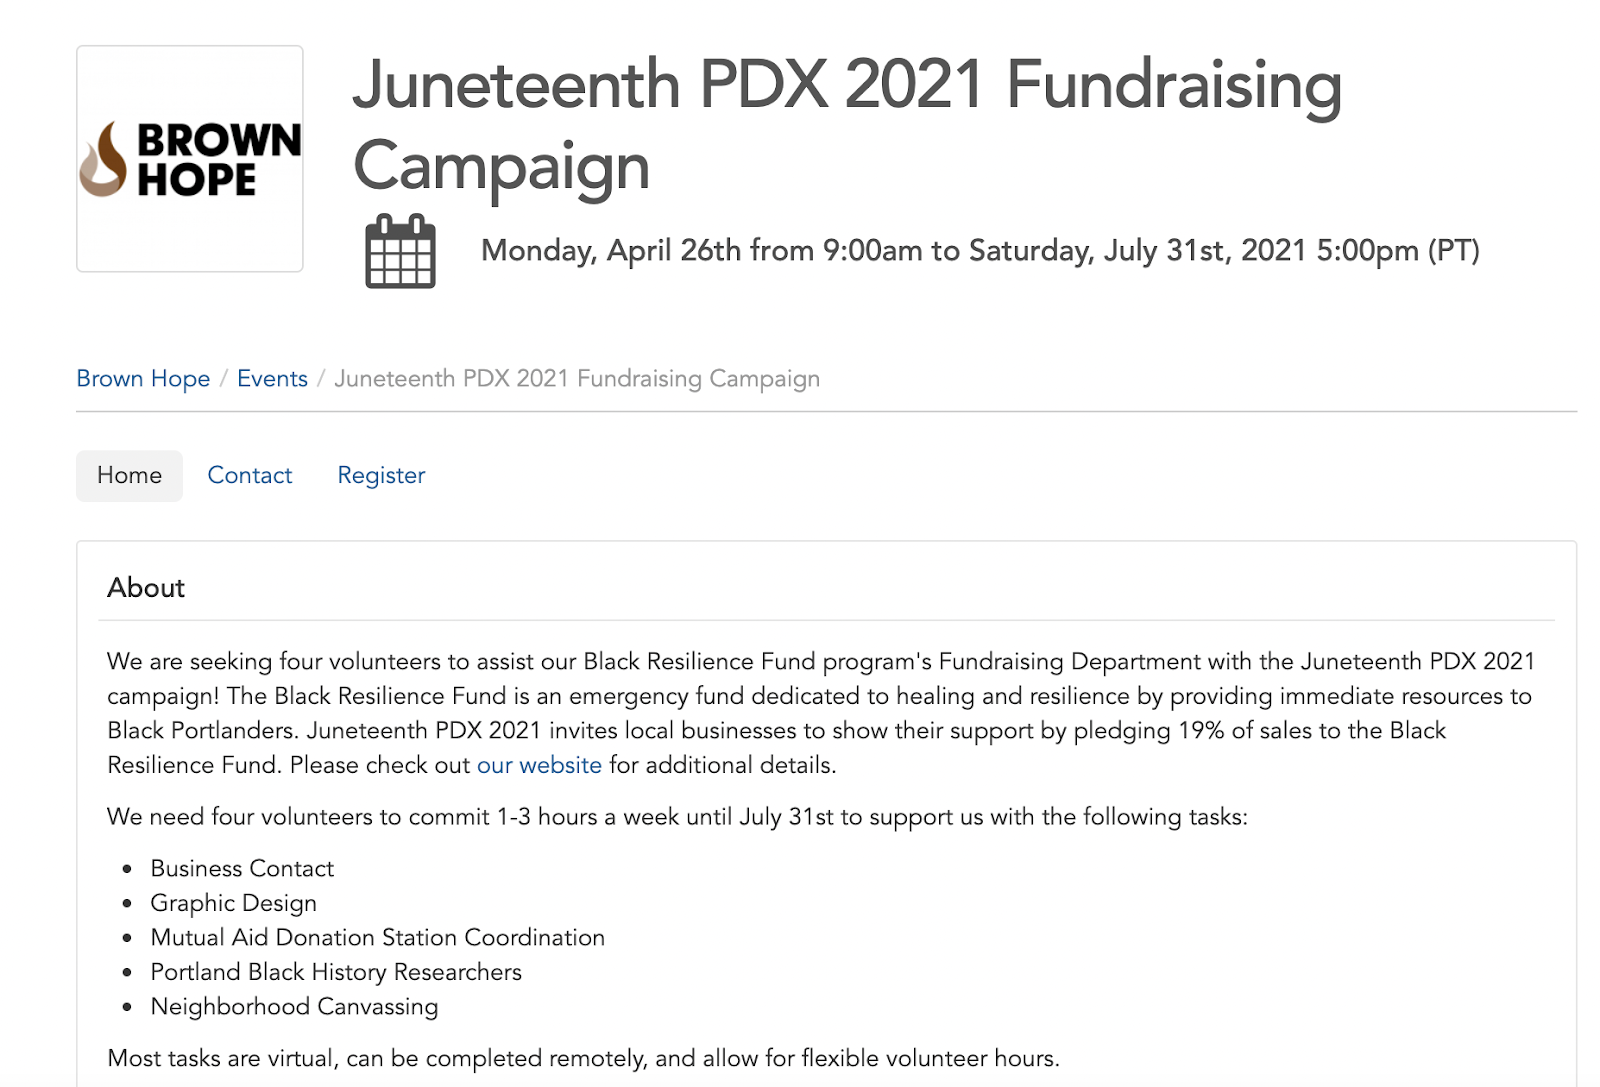 Brown Hope Juneteenth Fundraising Campaign page on GivePulse